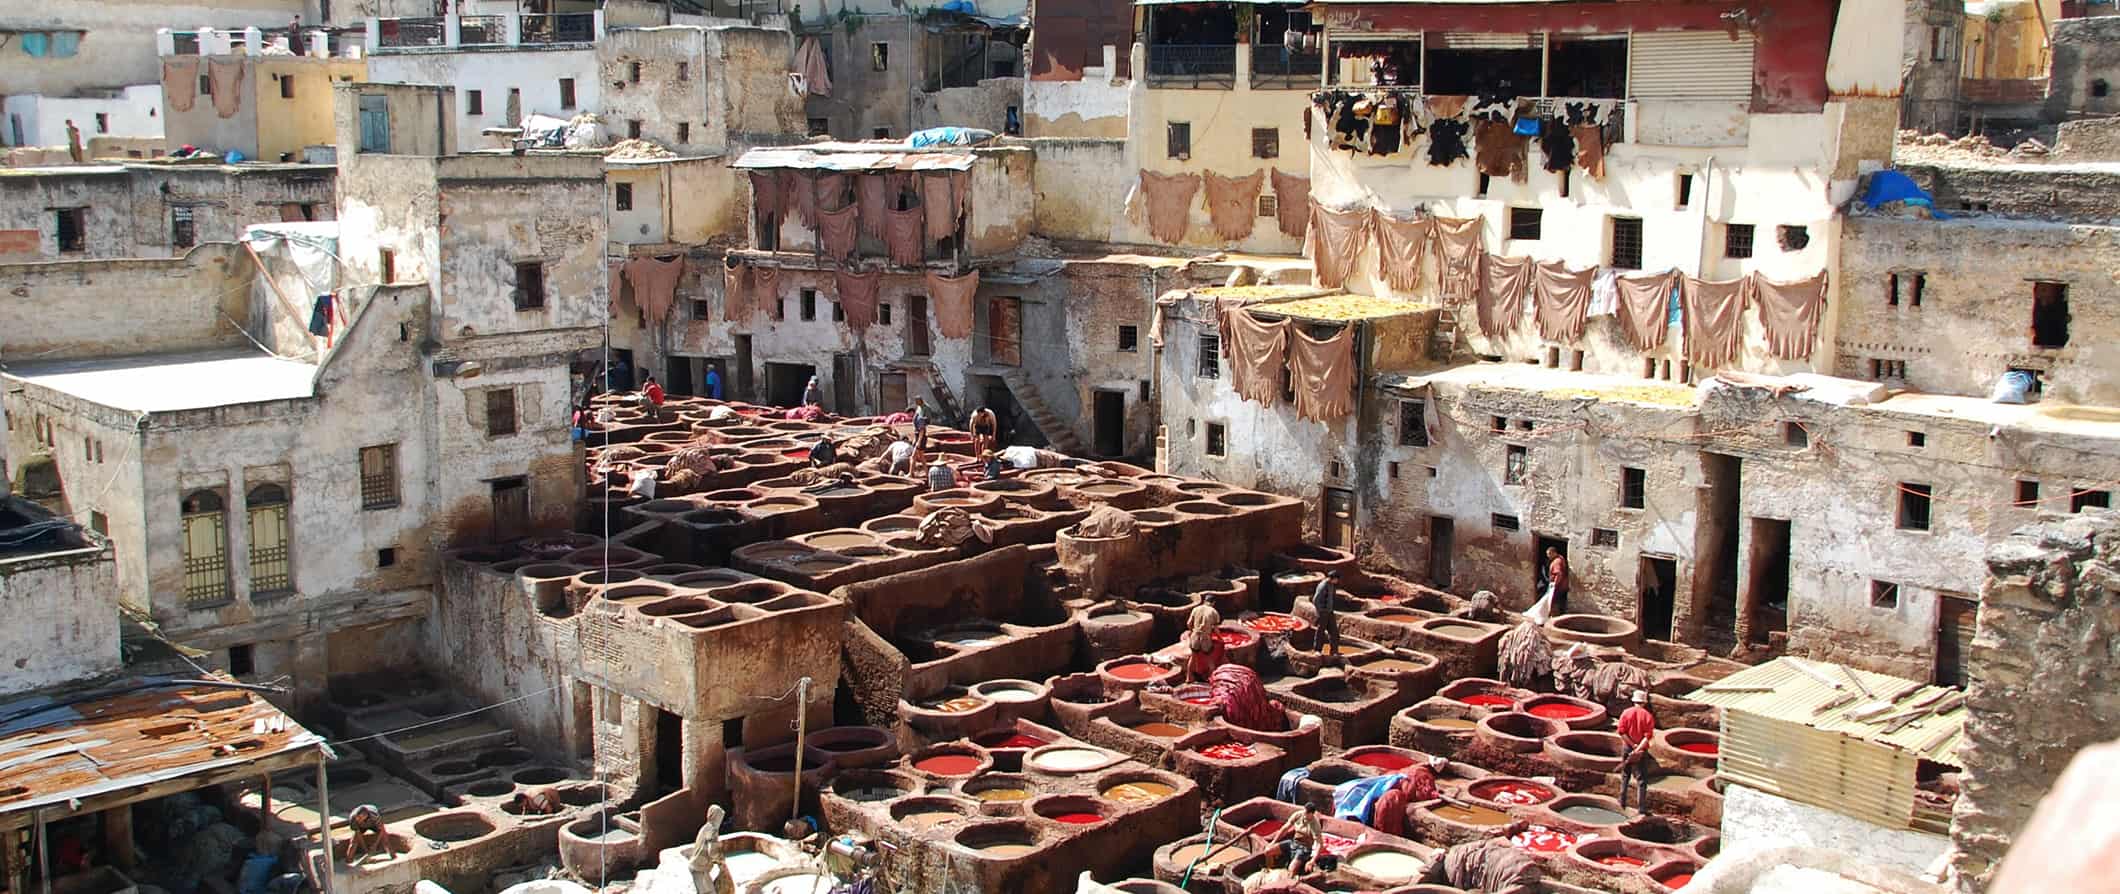 The huge, historical tannery in Fez surrounded by old, traditional Moroccan houses and buildings